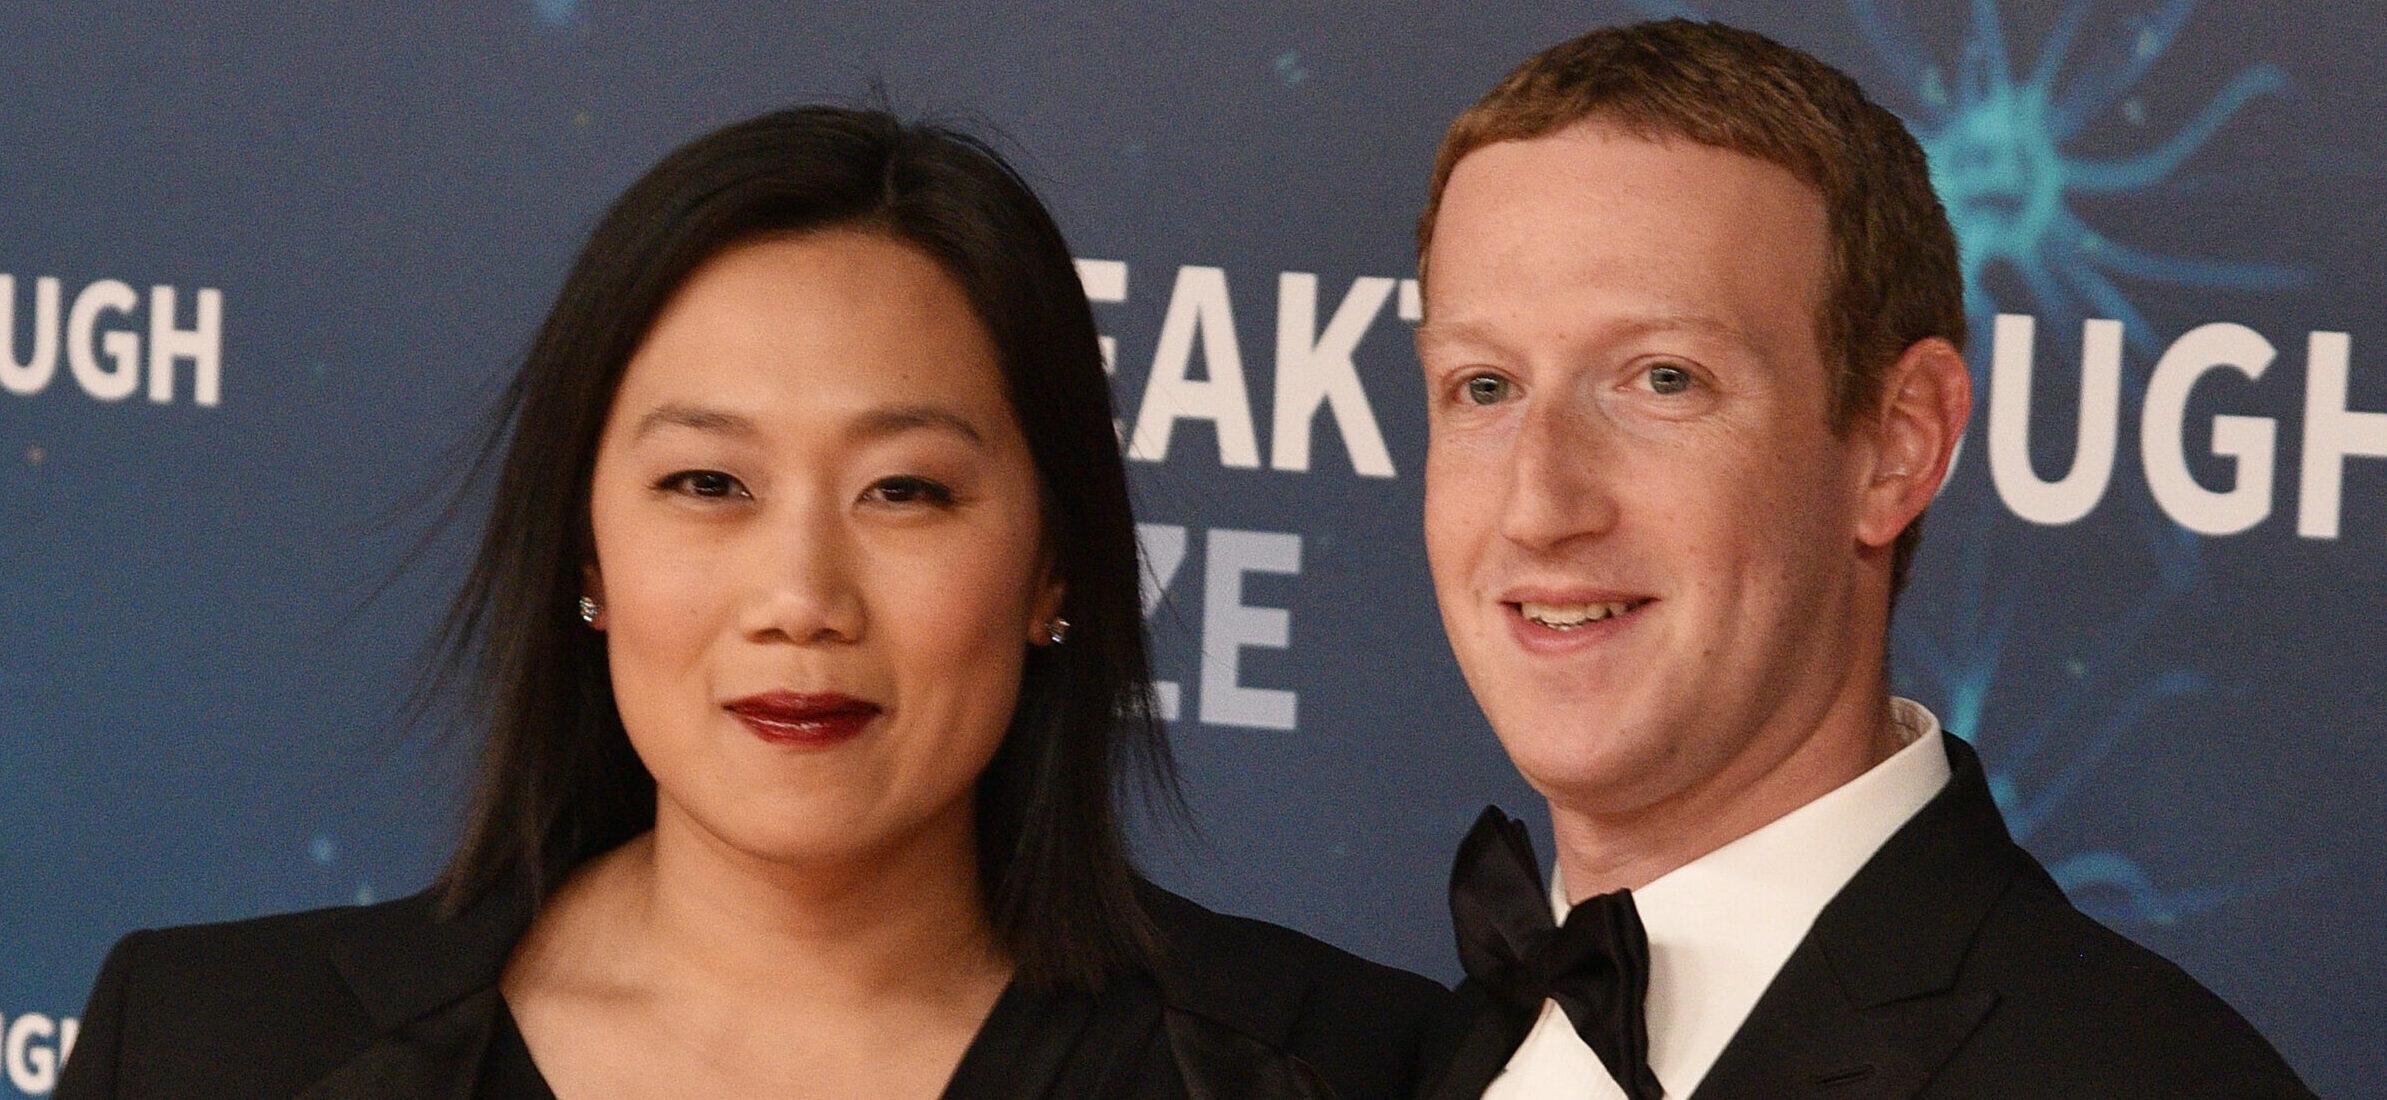 Mark Zuckerberg and Priscilla Chan at the 2020 Breakthrough Prize, Arrivals, Mountain View